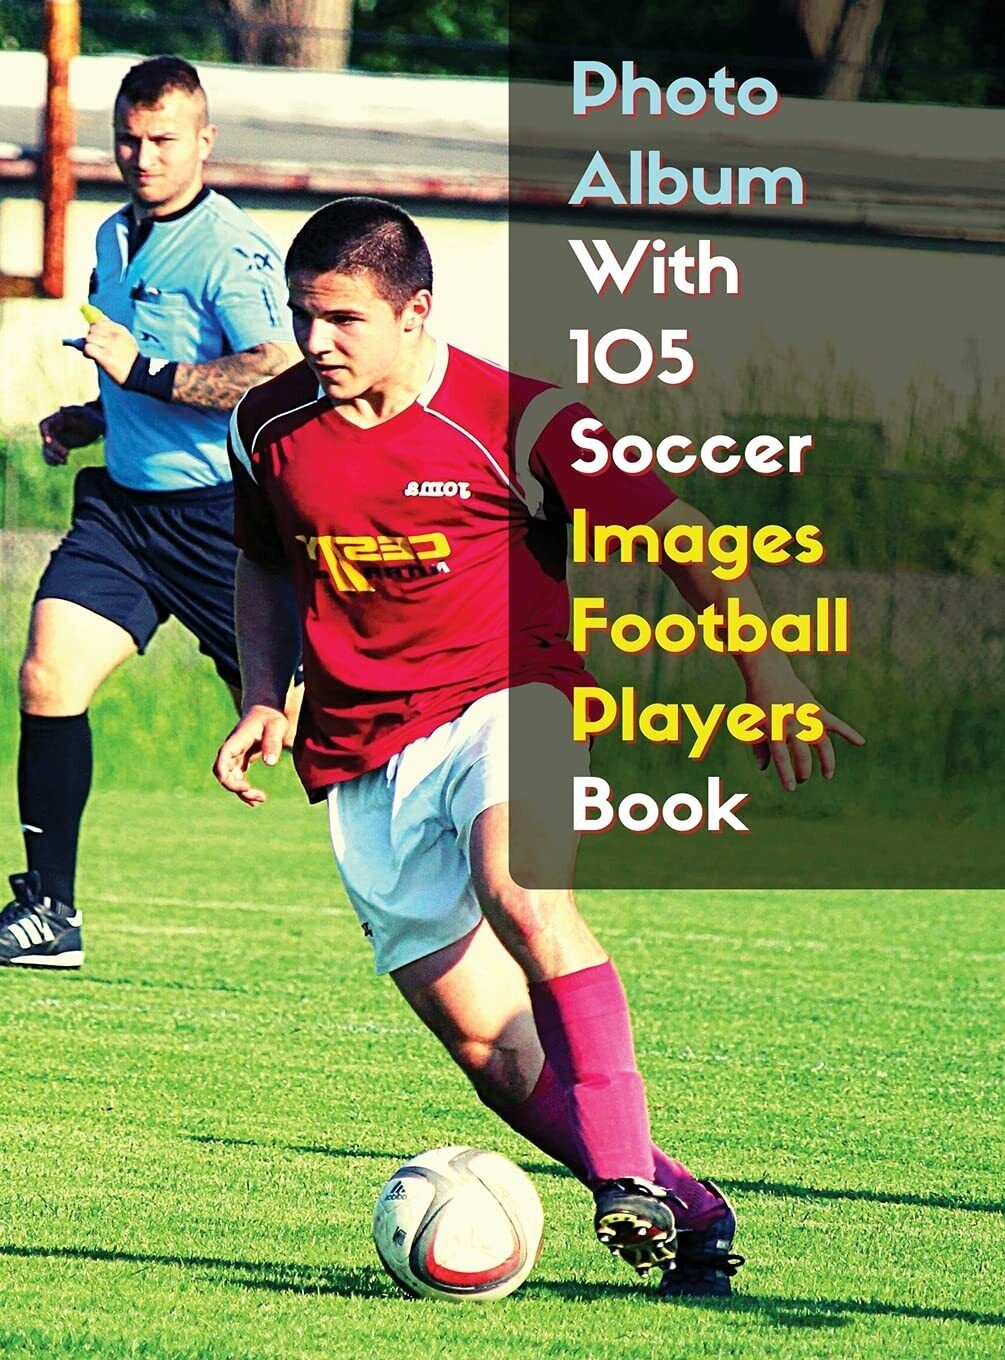 Photo Album With 105 Soccer Images Football Players Book - Photography, 2021 